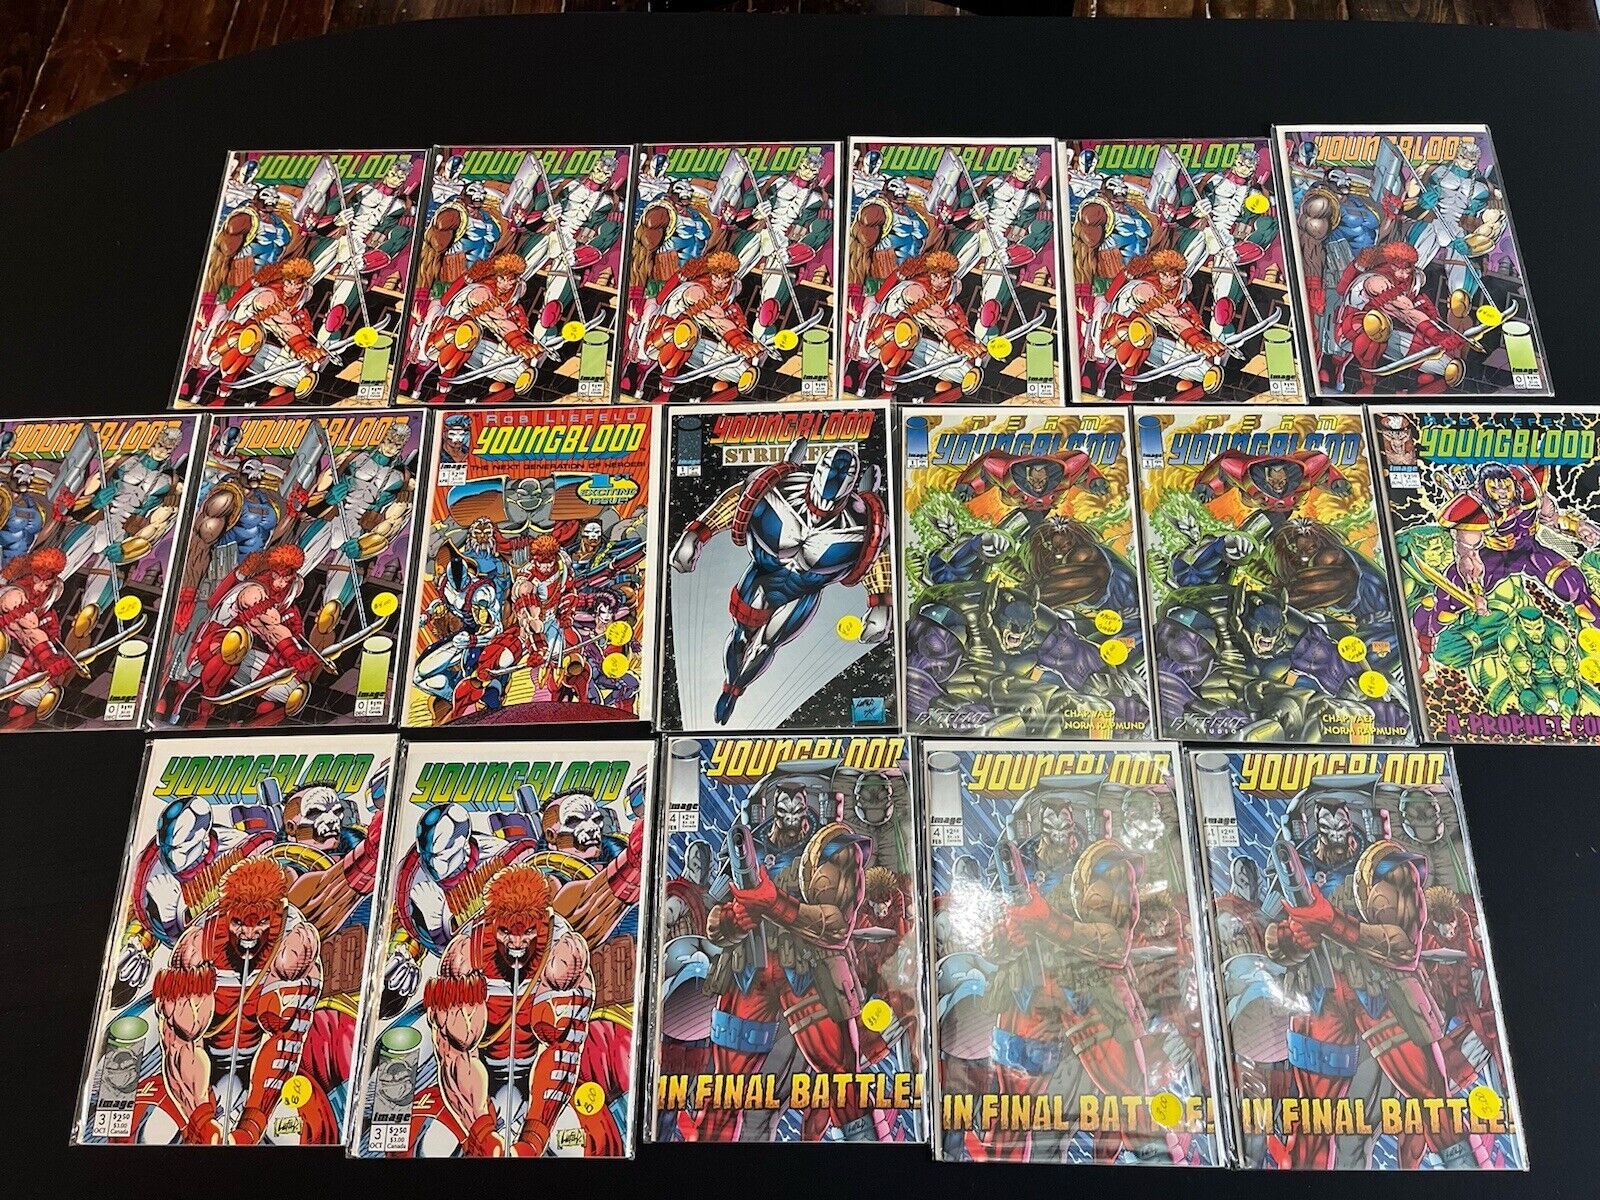 Team Youngblood #1 (Image Comics, September 1993)/ LOT OF 18 VARIENTS AND RARE